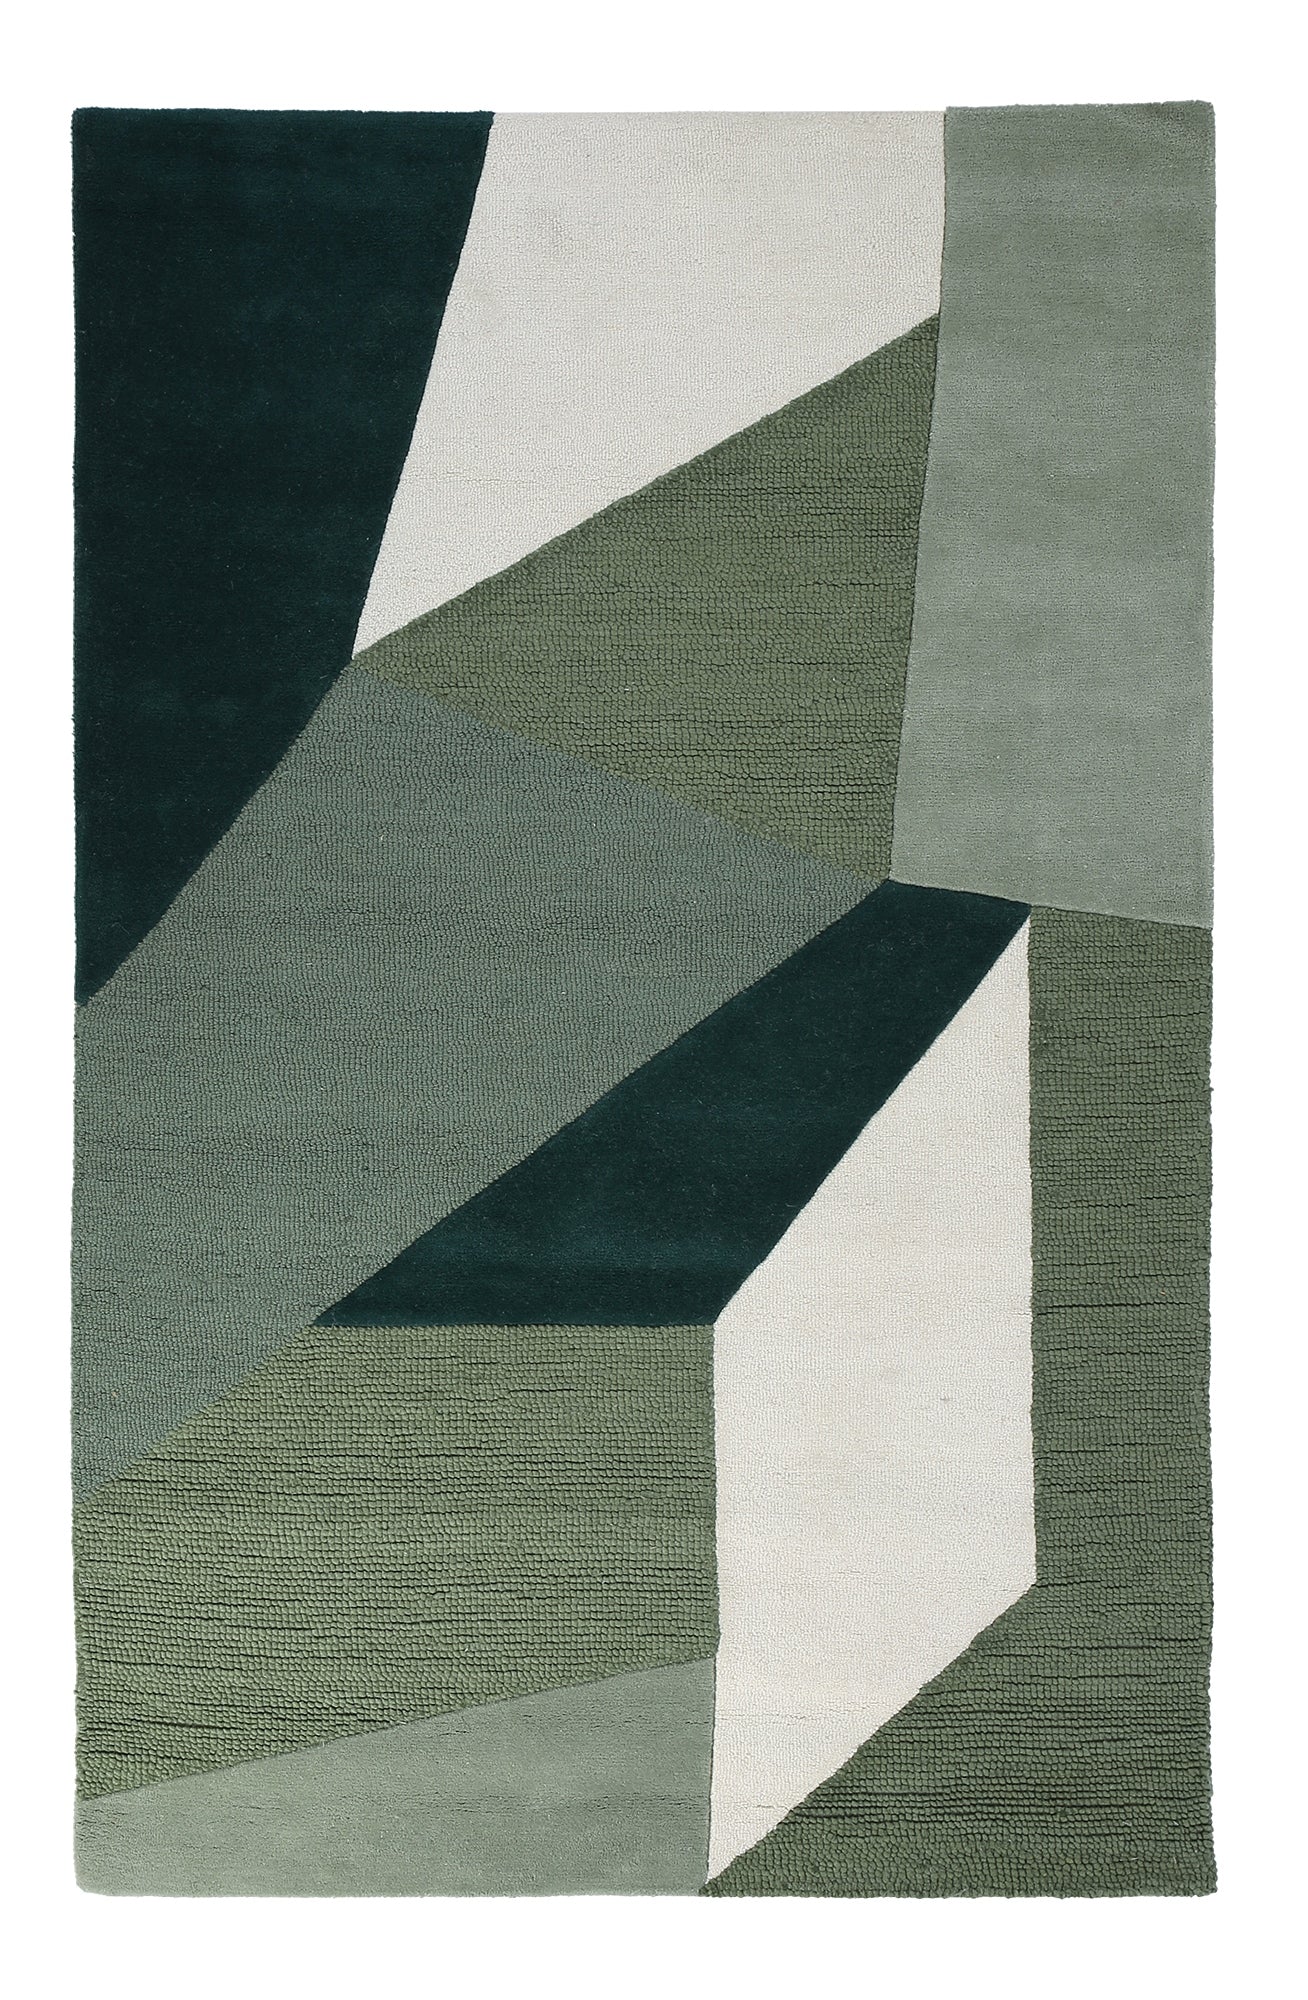 Olive Green Grey and Natural Hand Tufted Wool Rug - 5'x8'